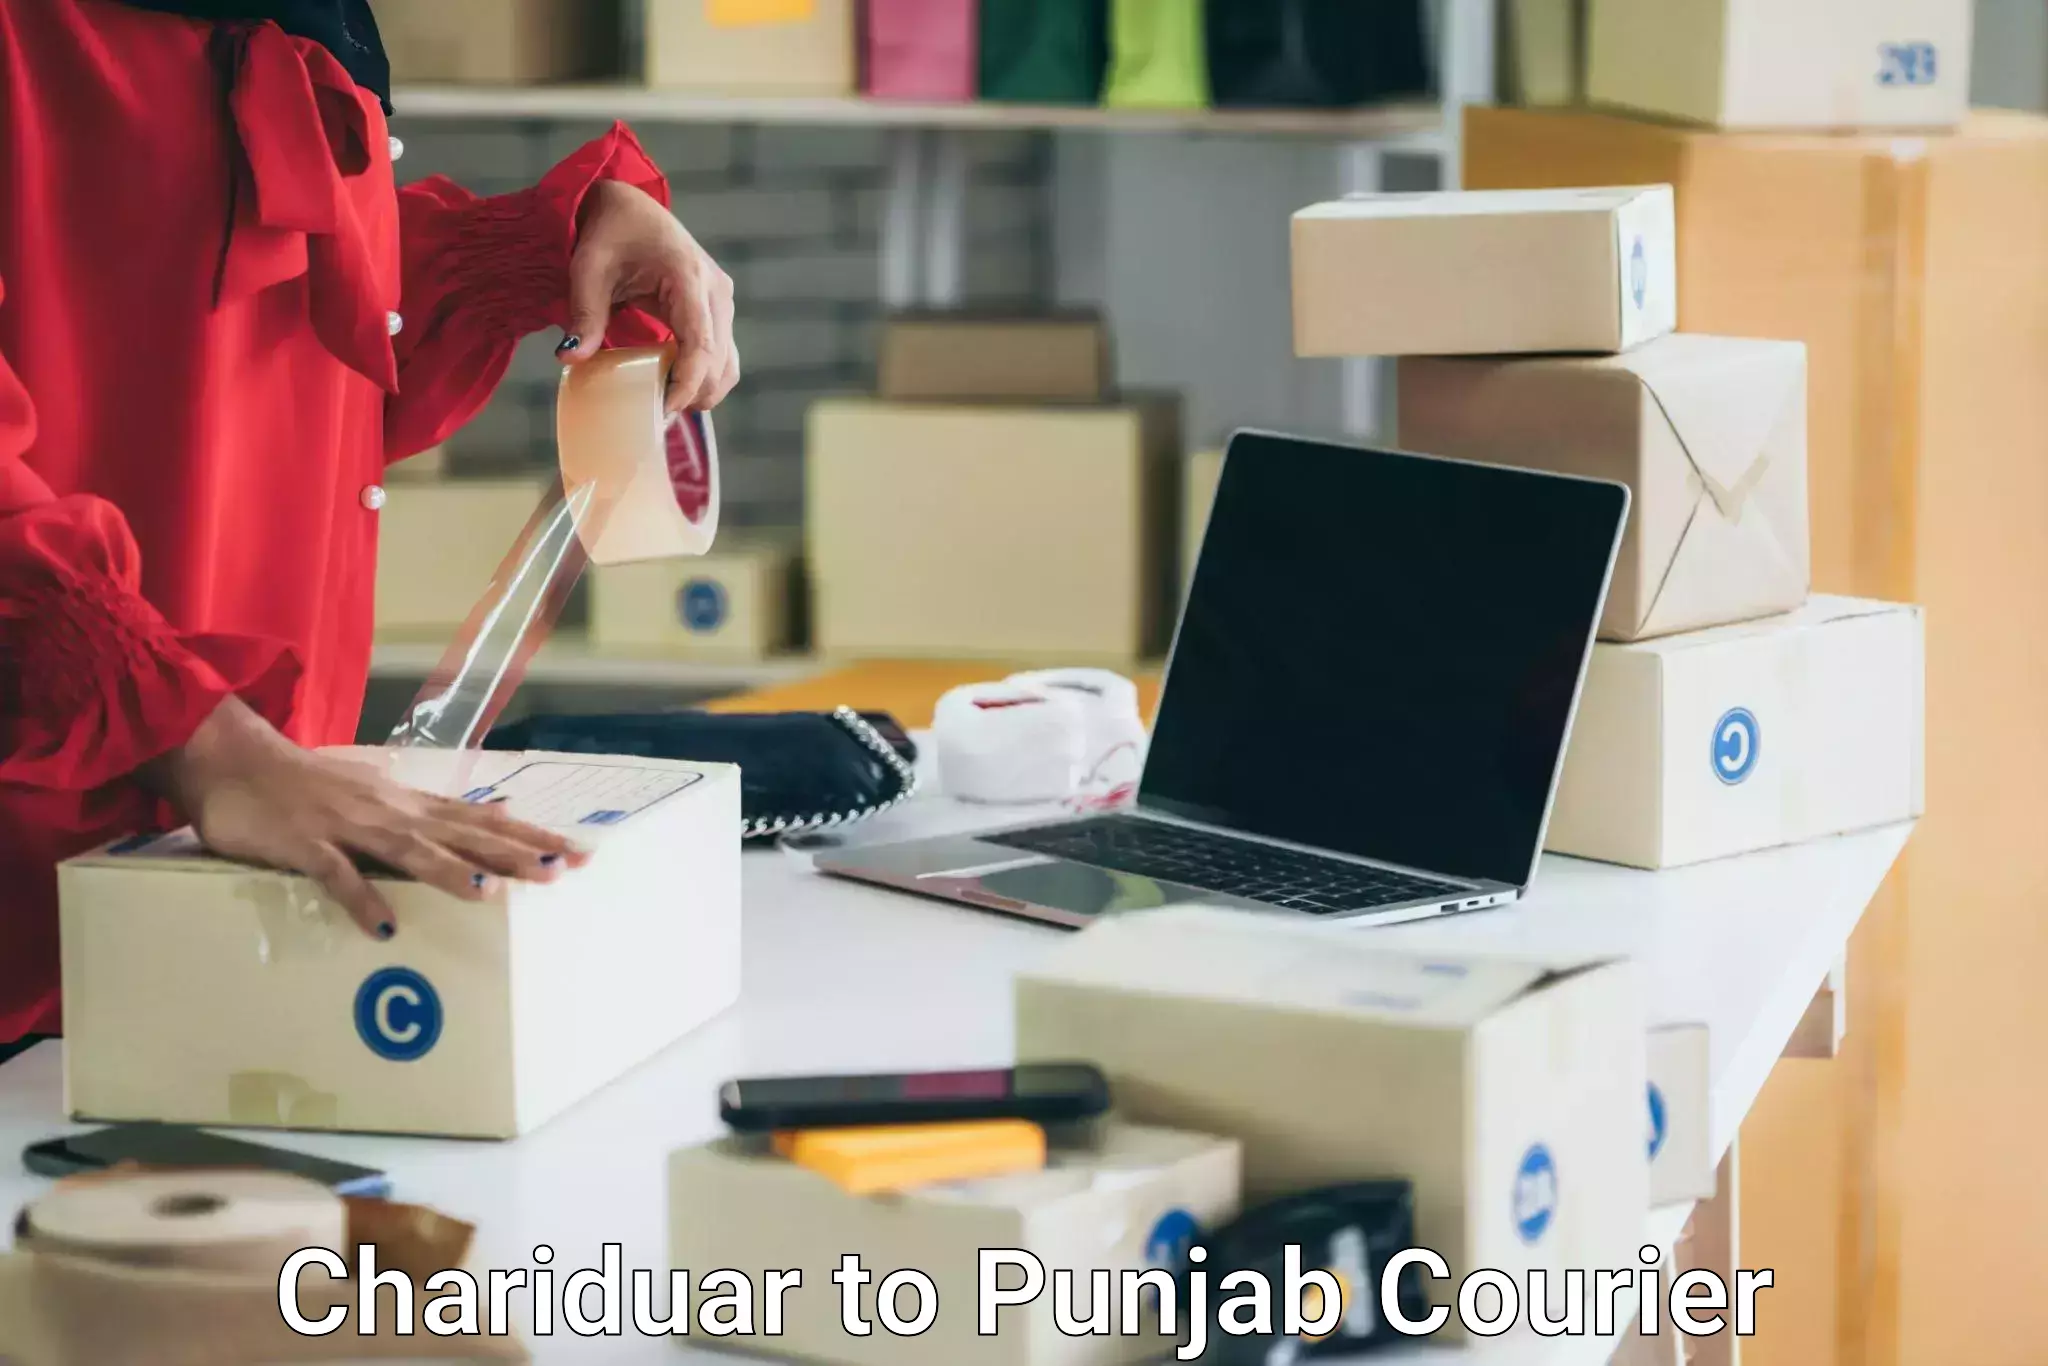 Moving and packing experts Chariduar to Punjab